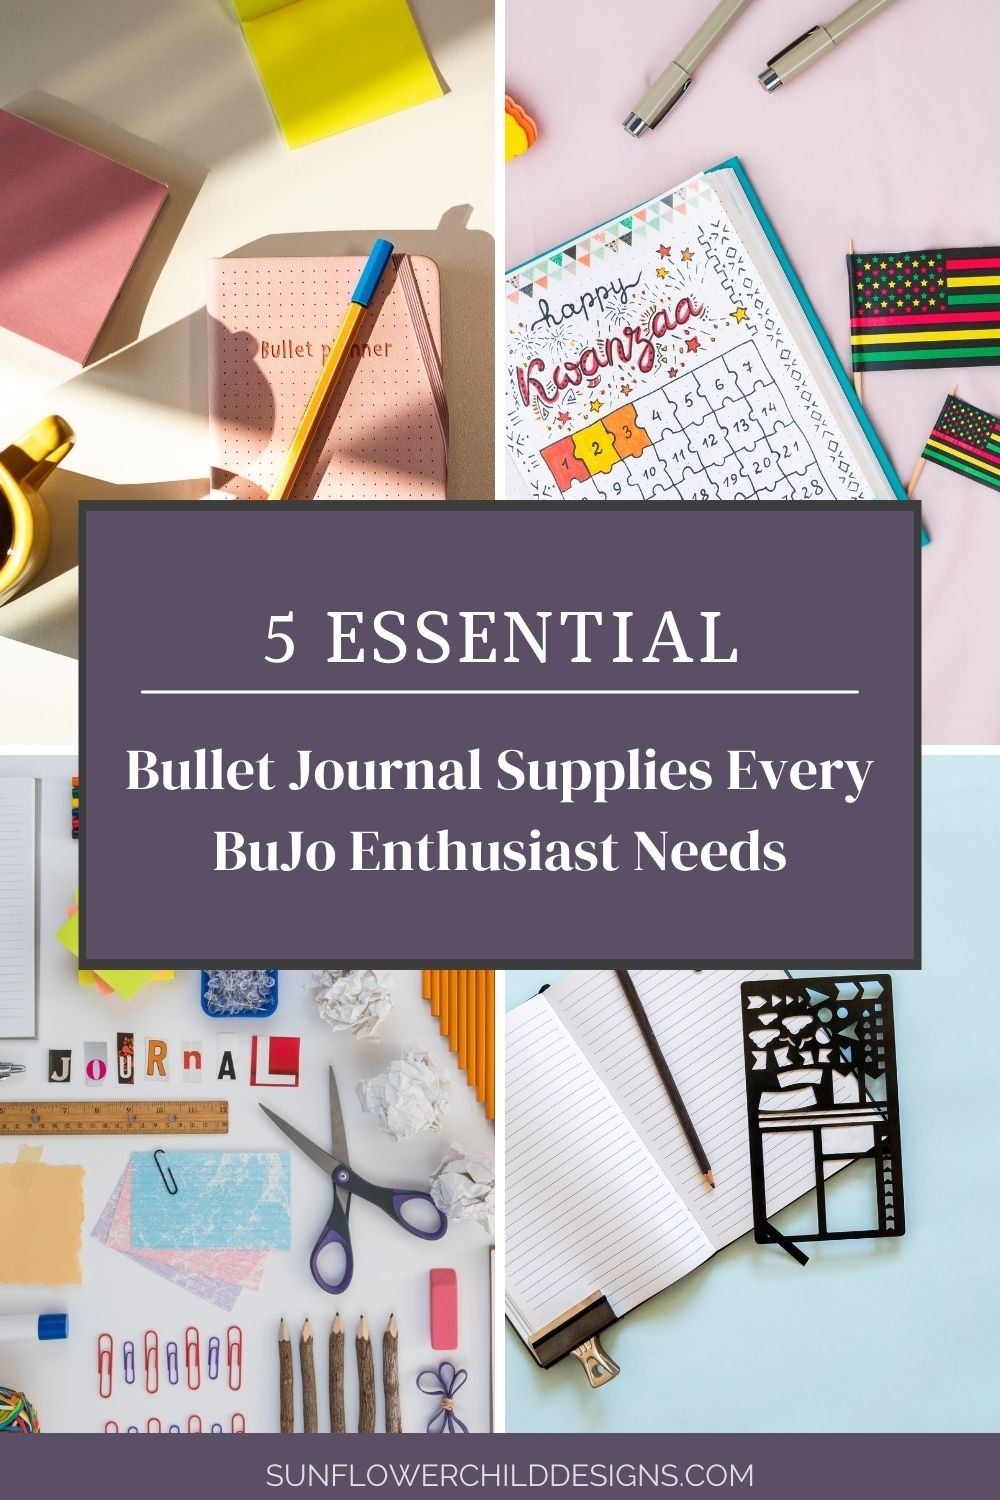 Bullet Journal Supplies - Which are necessary and which are not?